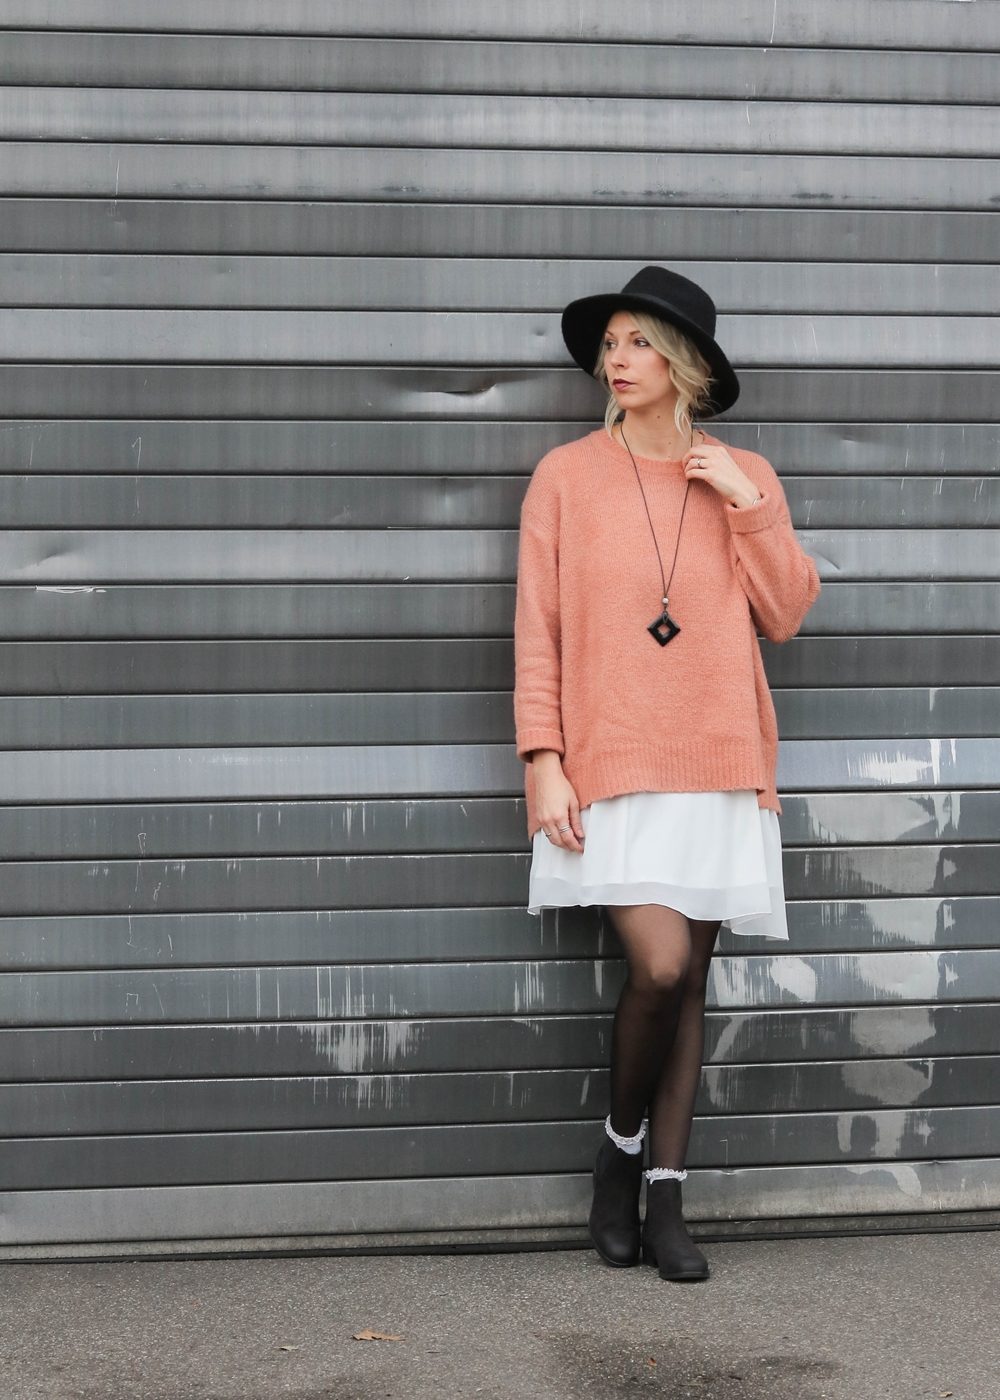 fashionblogger-outfit-ankle-boots-shoemates-rosa-strickpullover-zara-lagenlook-20